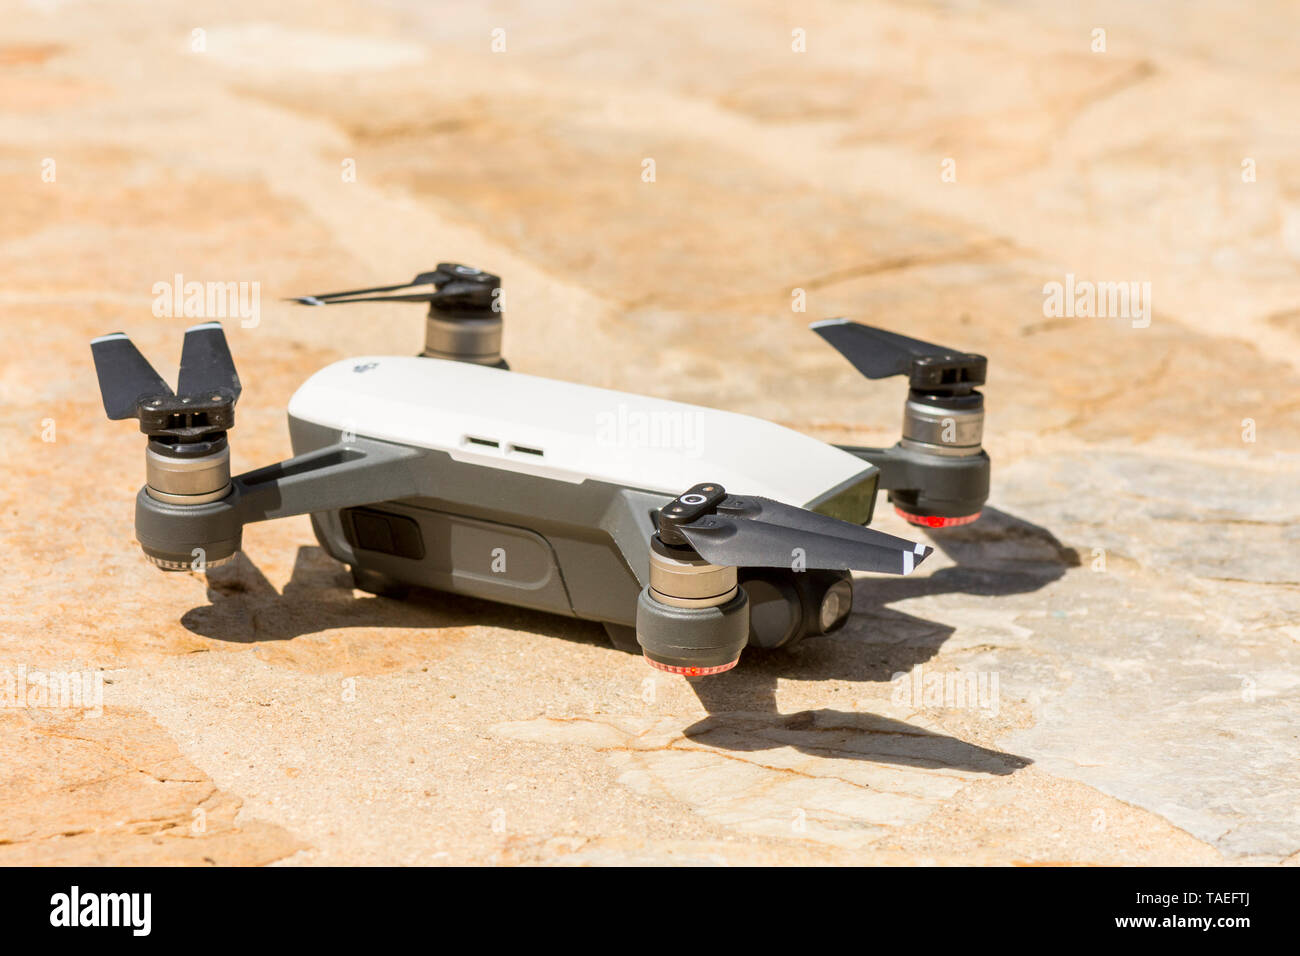 Drone copter, DJI Spark, on the ground with high resolution digital camera. Stock Photo